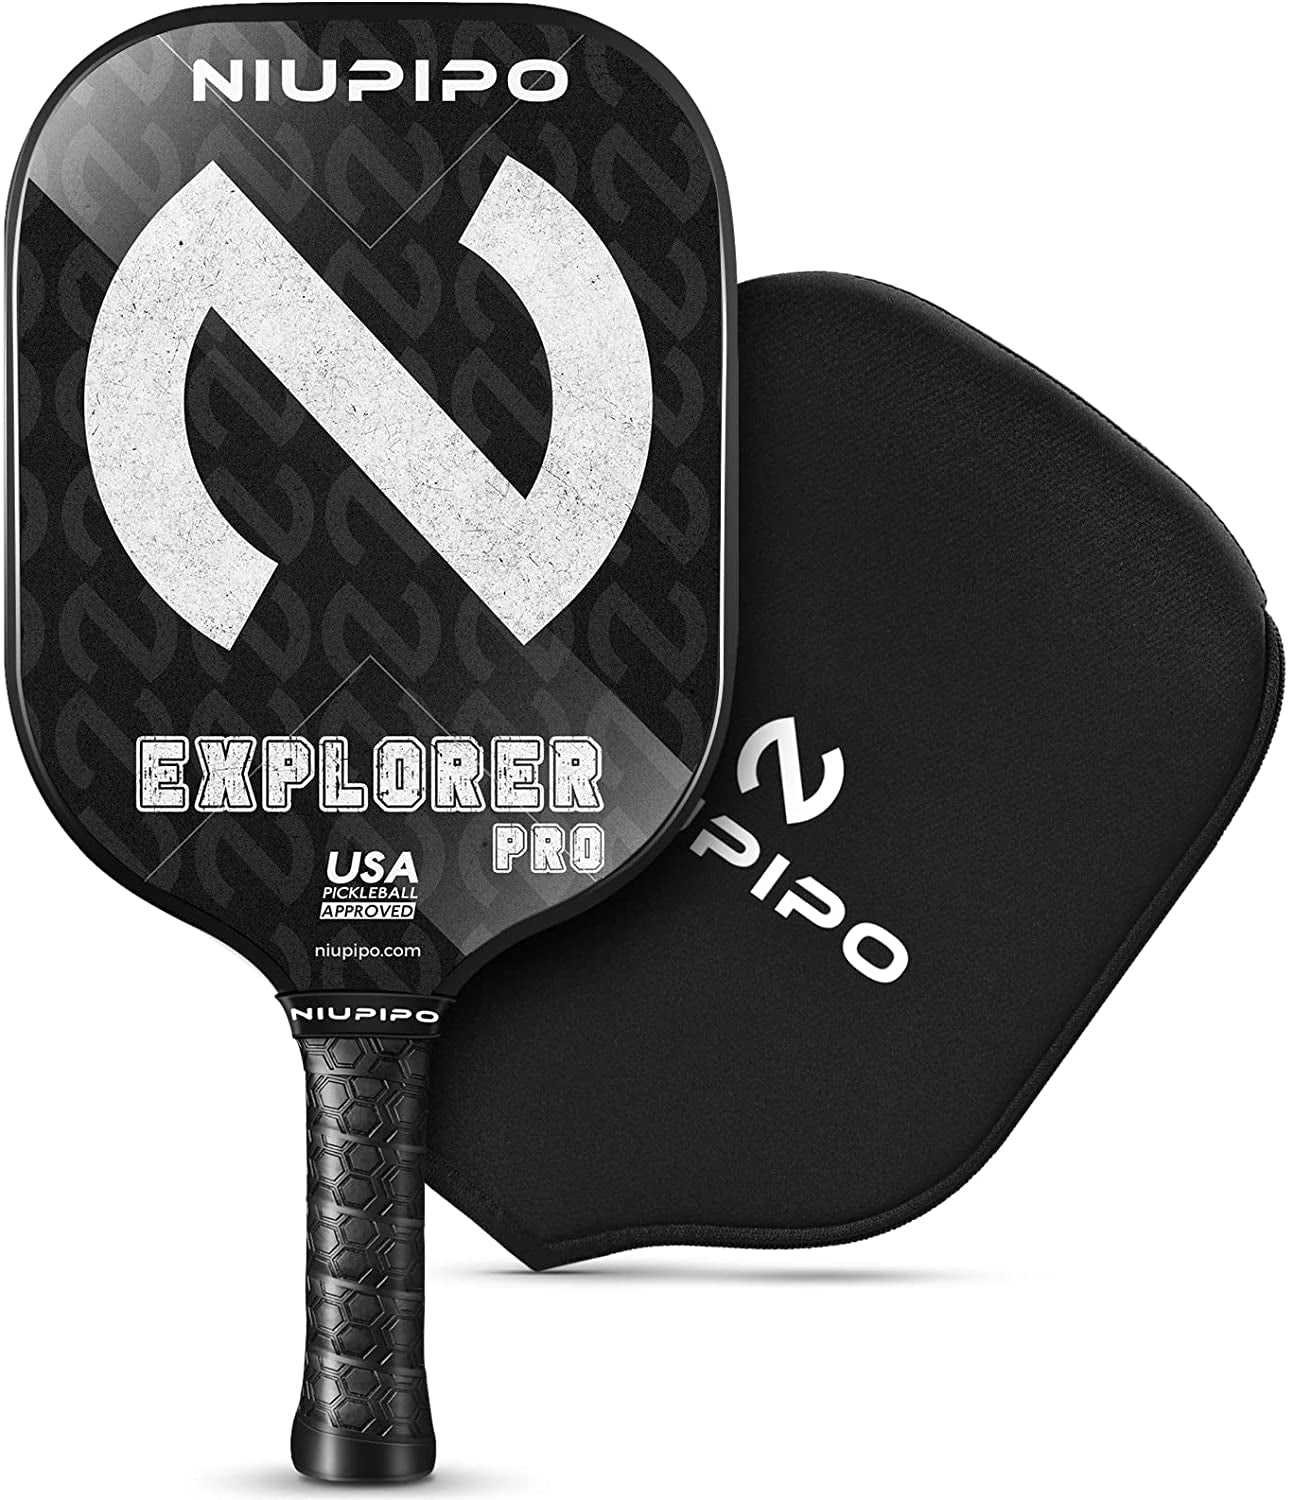 "Professional Grade Graphite Pickleball Paddle Set - Approved by USAPA, Feather-Light Racket with Advanced Honeycomb Core and Ultra-Comfort Grip - Complete with Travel Bag and Paddle Protection Cover"